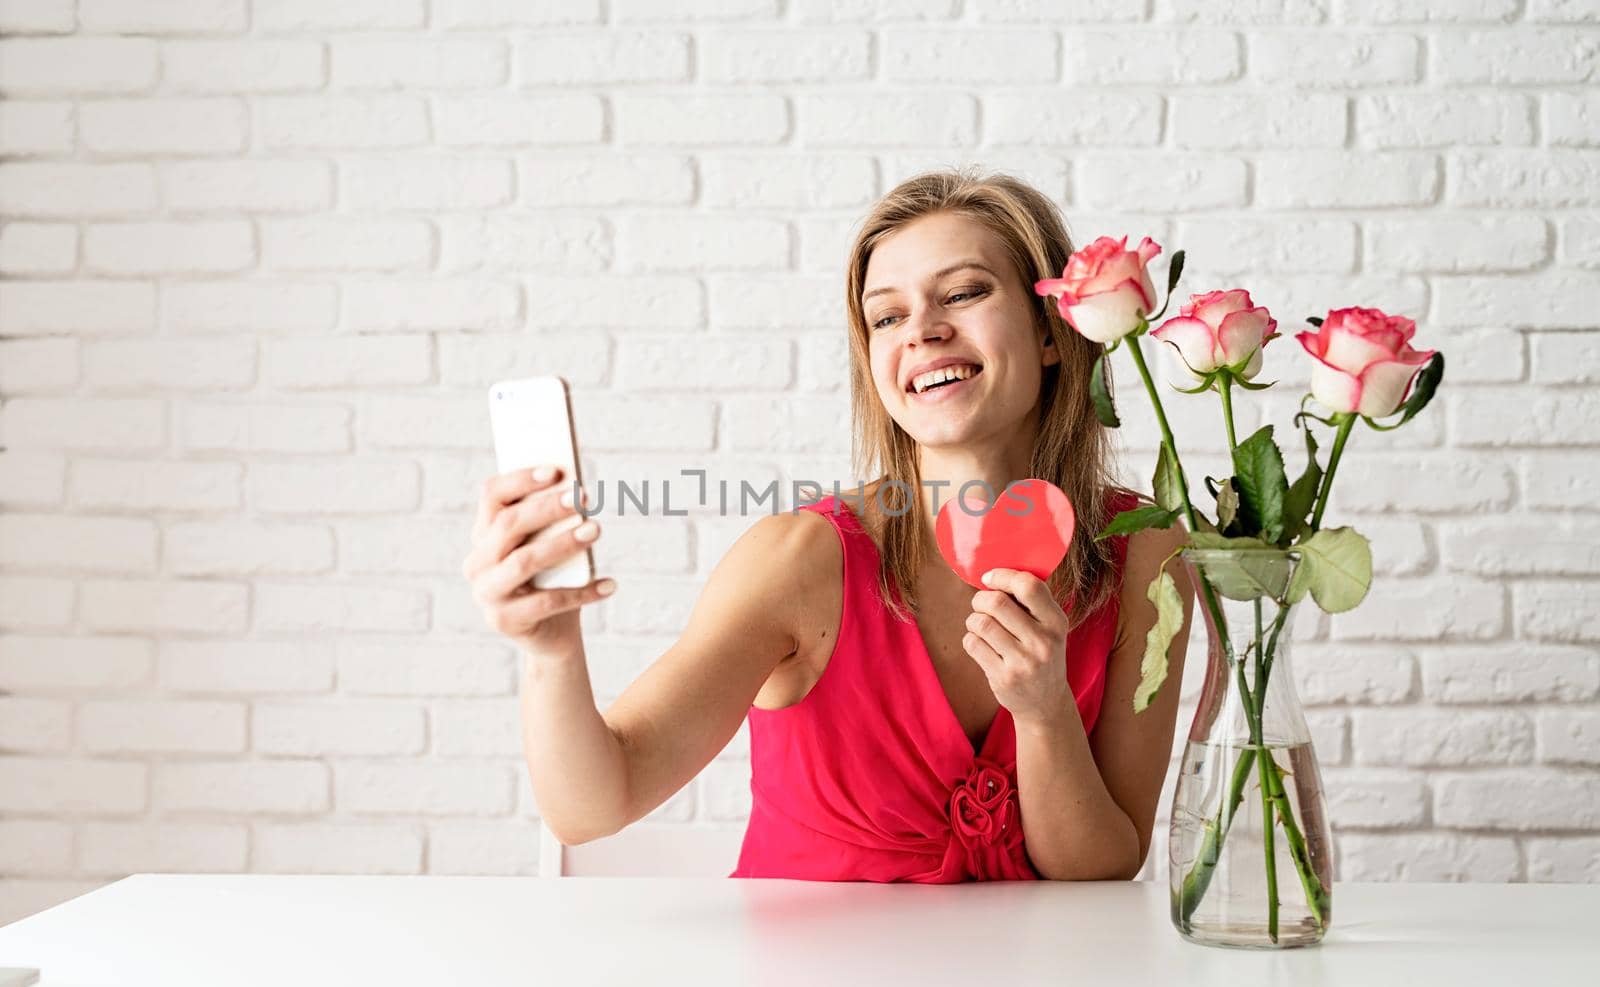 Valentines Day. Beautiful woman in pink dress dating online holding a heart in her hands